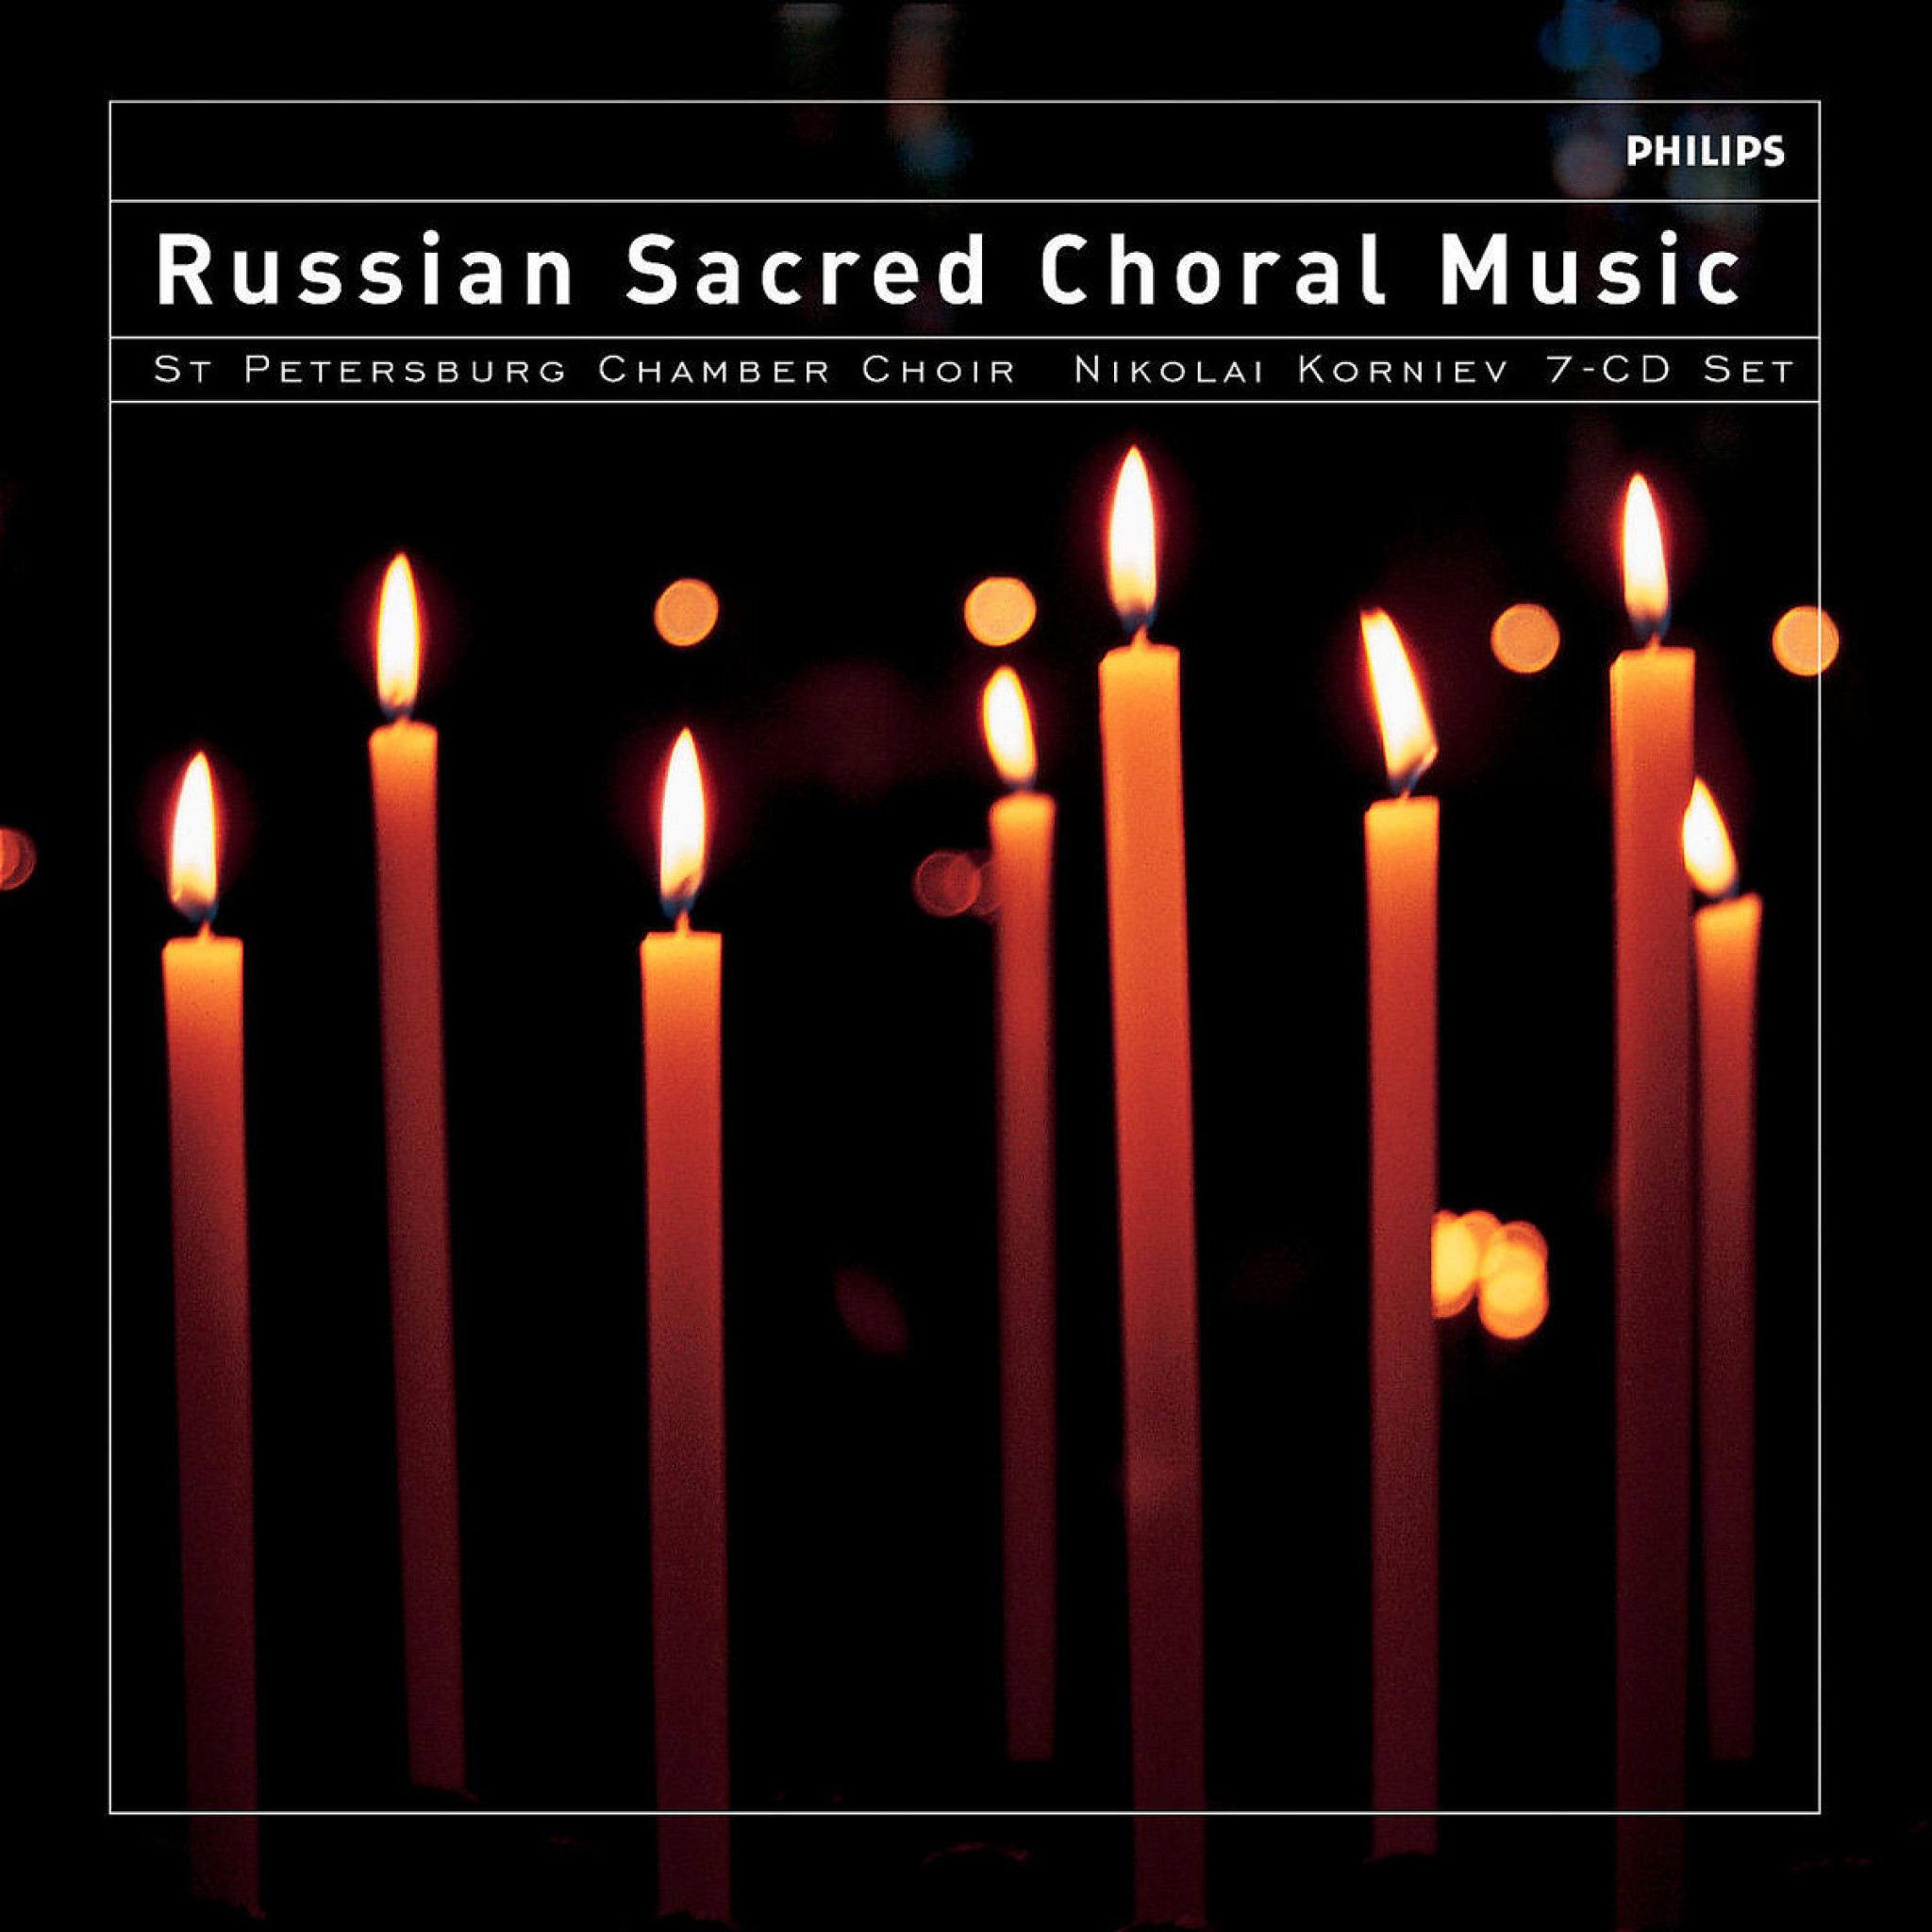 SACRED CHORAL MUSIC FROM RUSSIA 